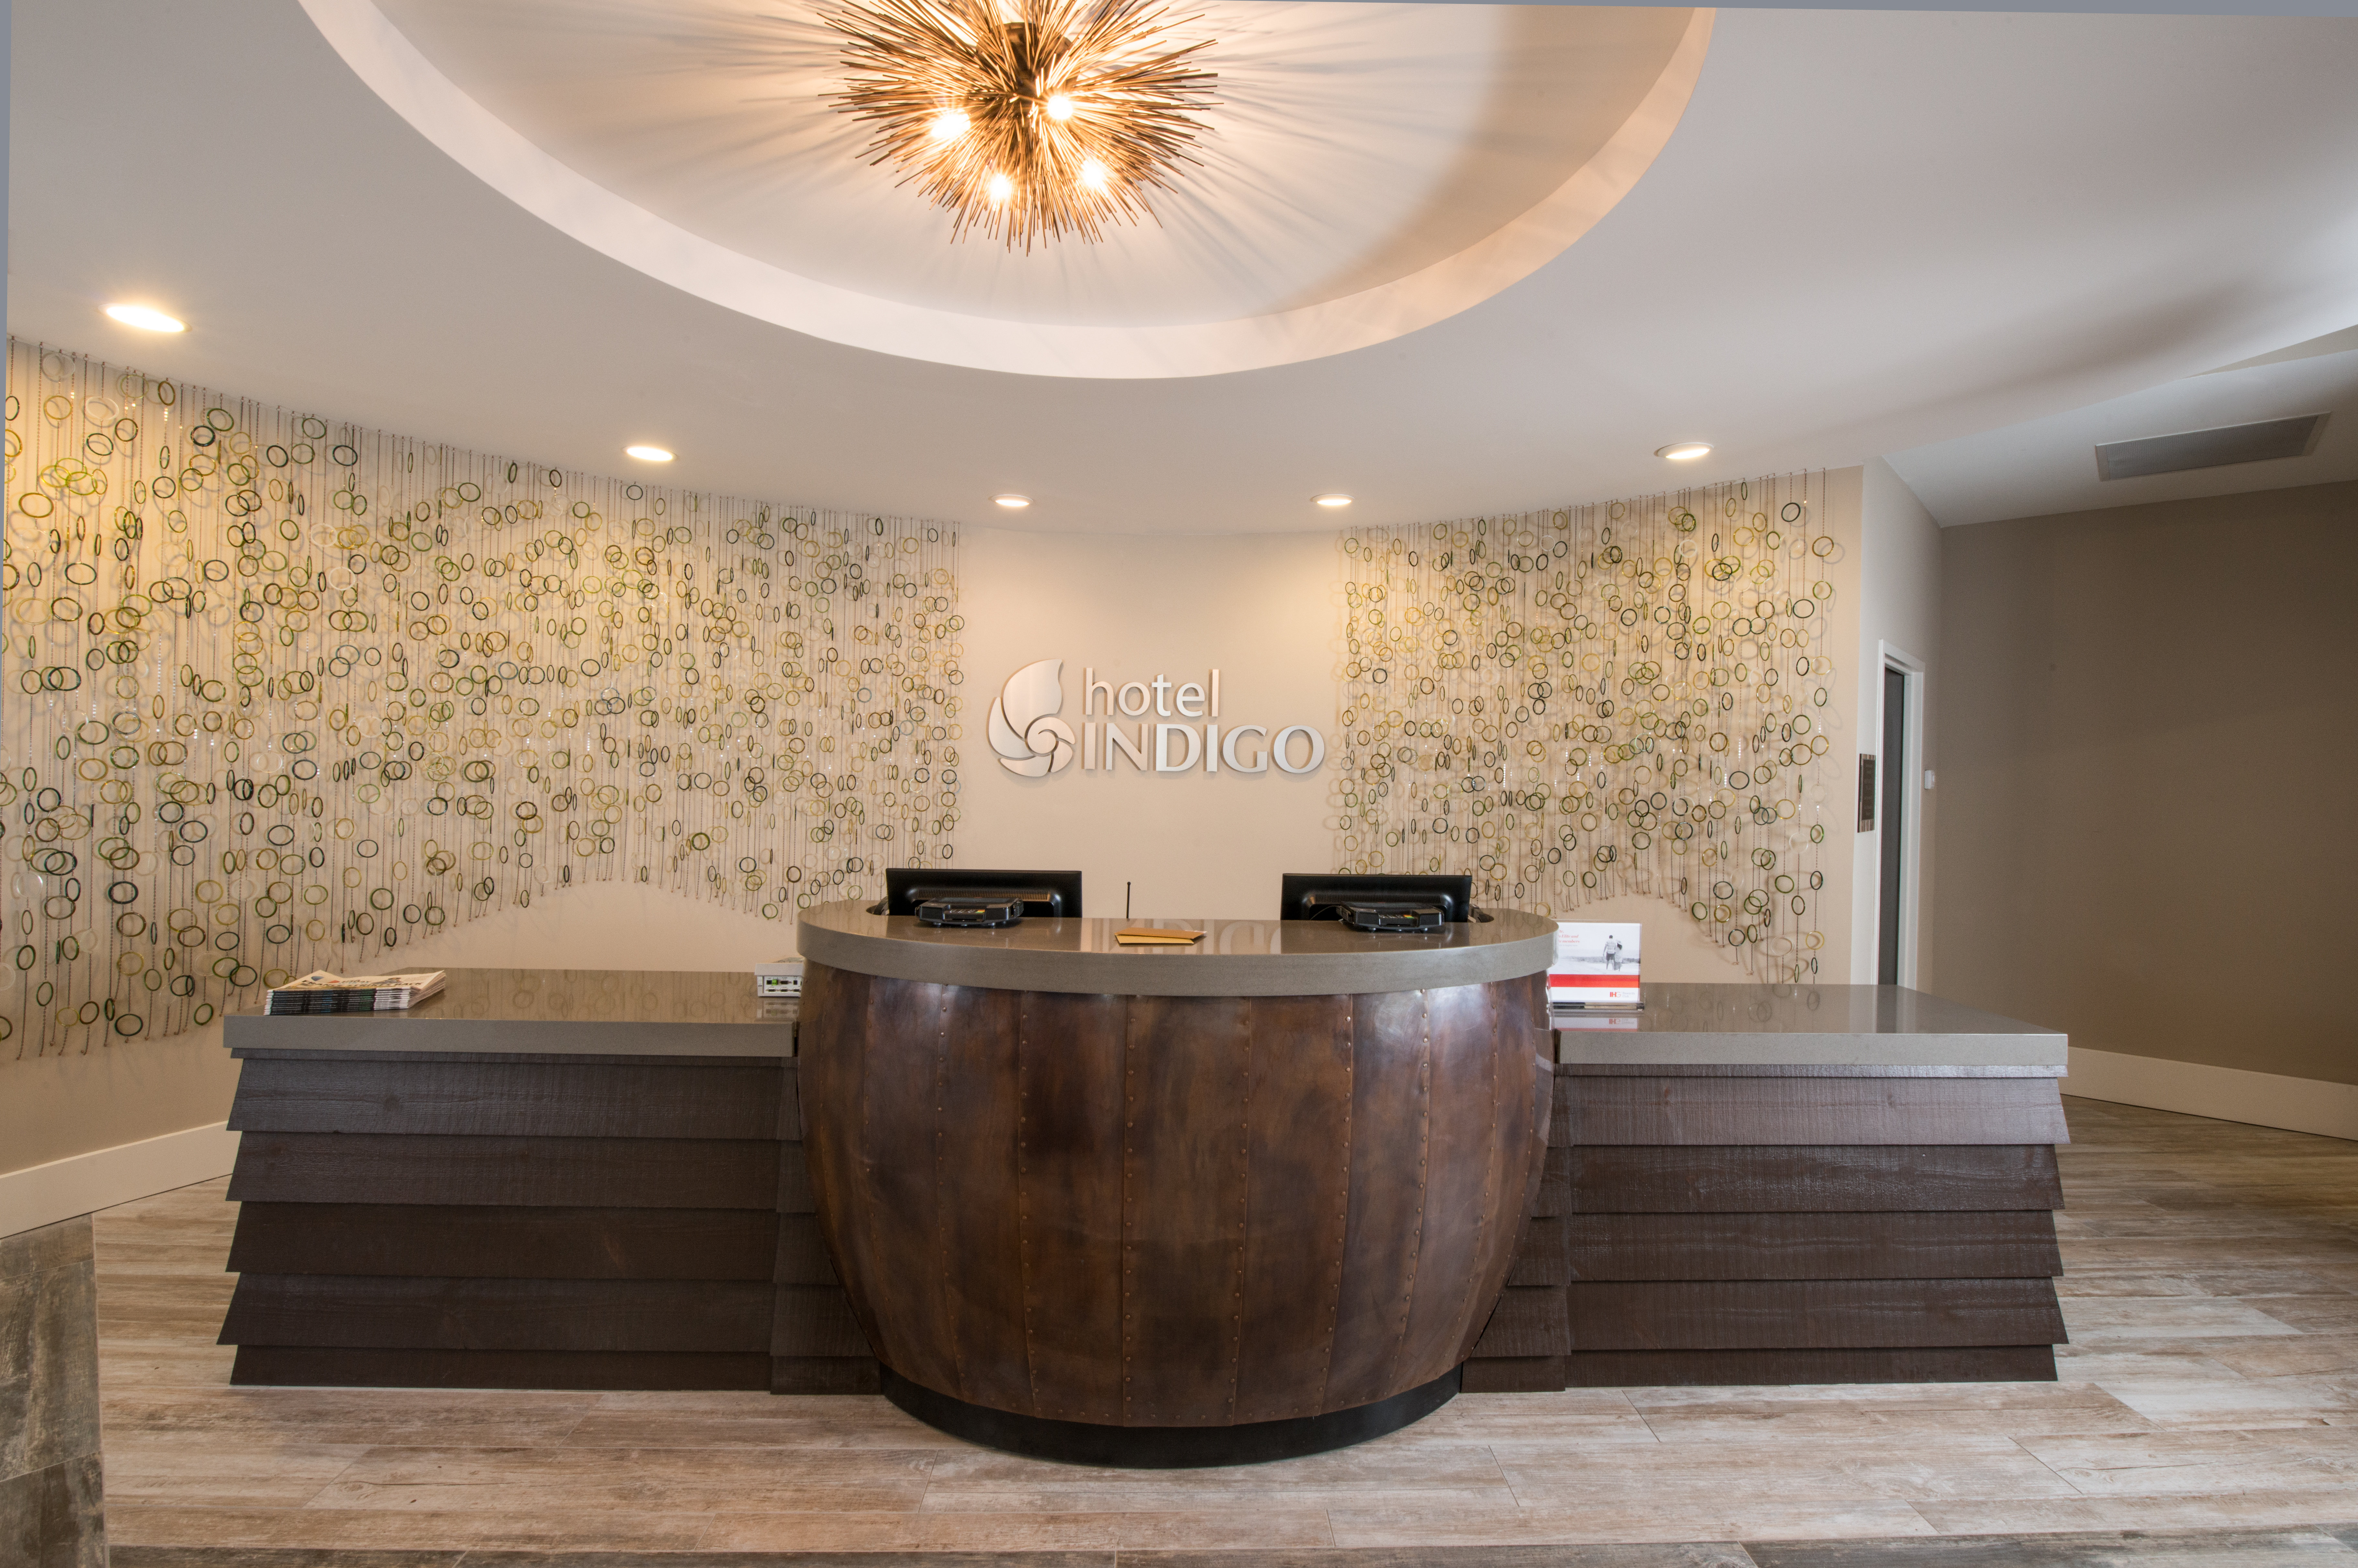 The Front Desk where expert and friendly staff are ready to help